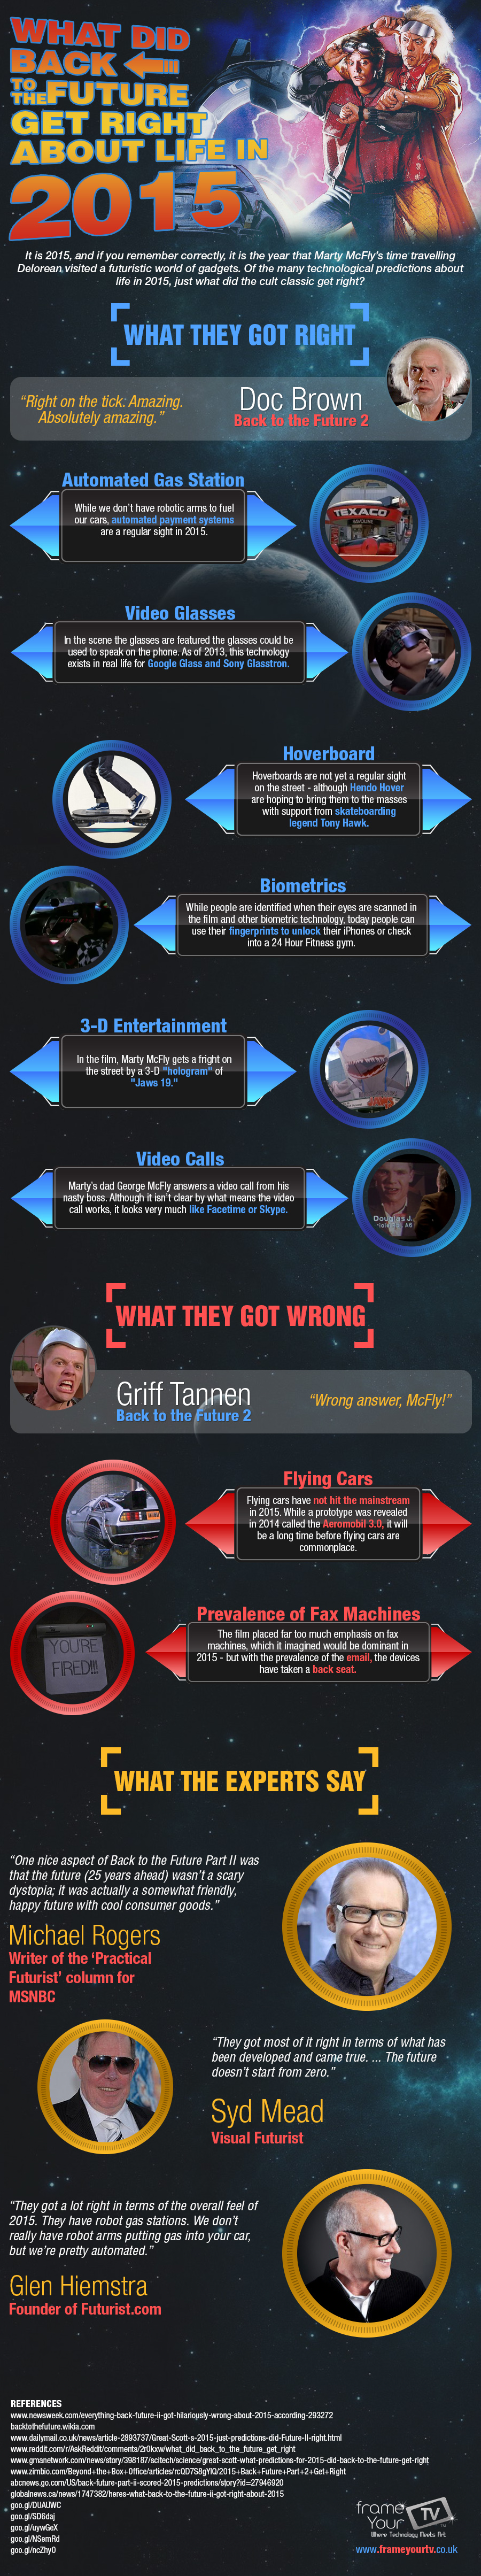 Back-to-the-Future-Infographic